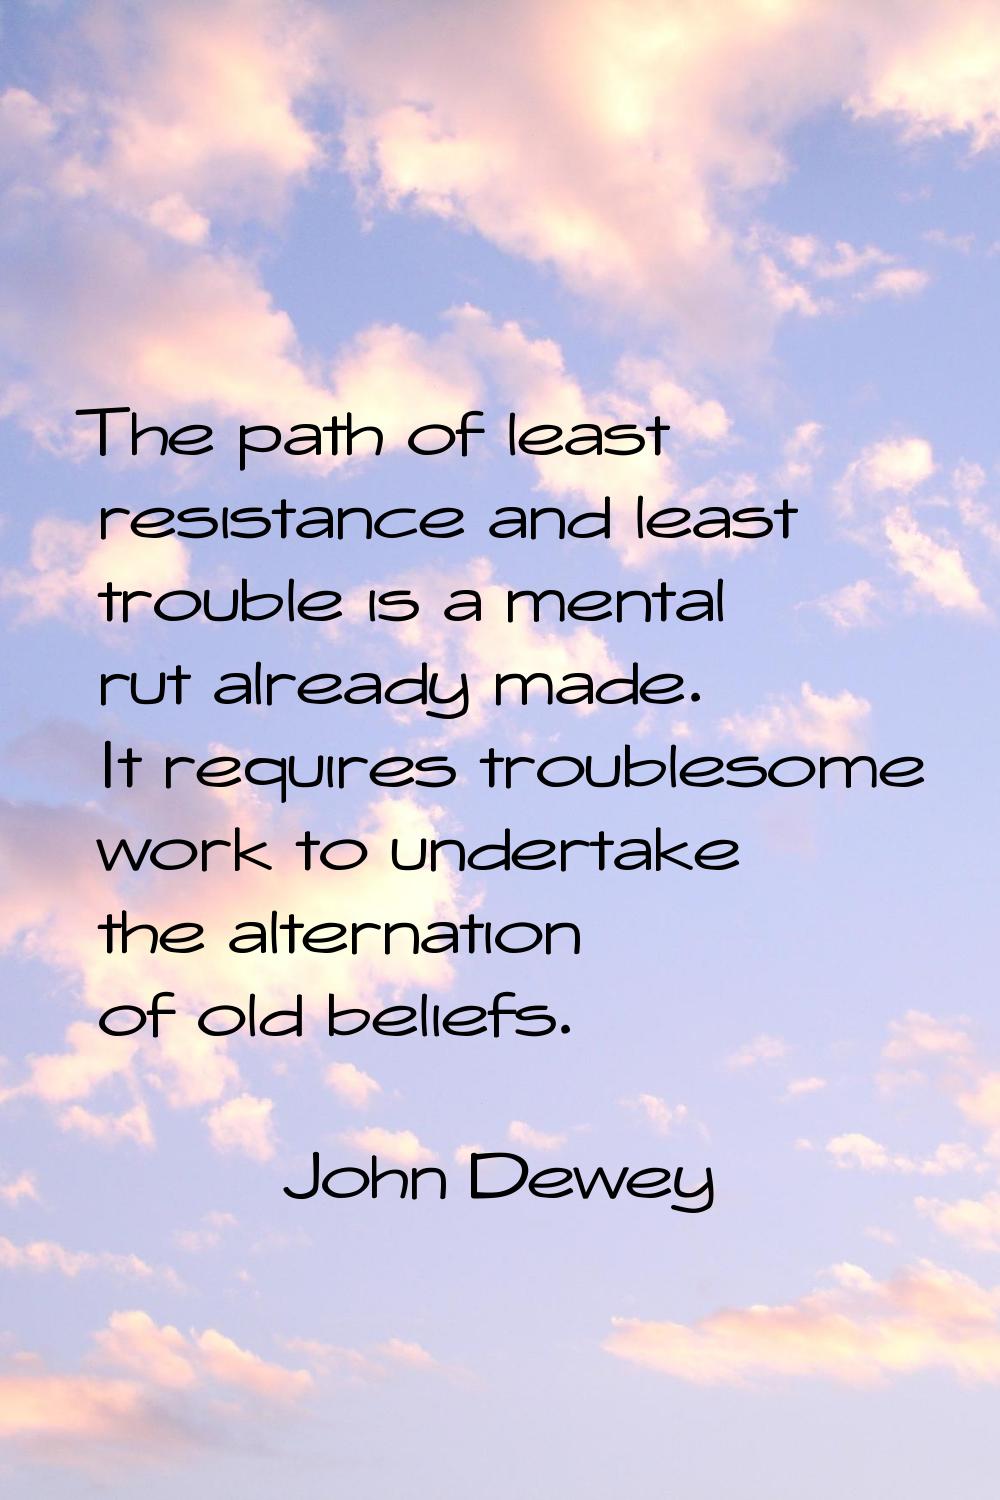 The path of least resistance and least trouble is a mental rut already made. It requires troublesom